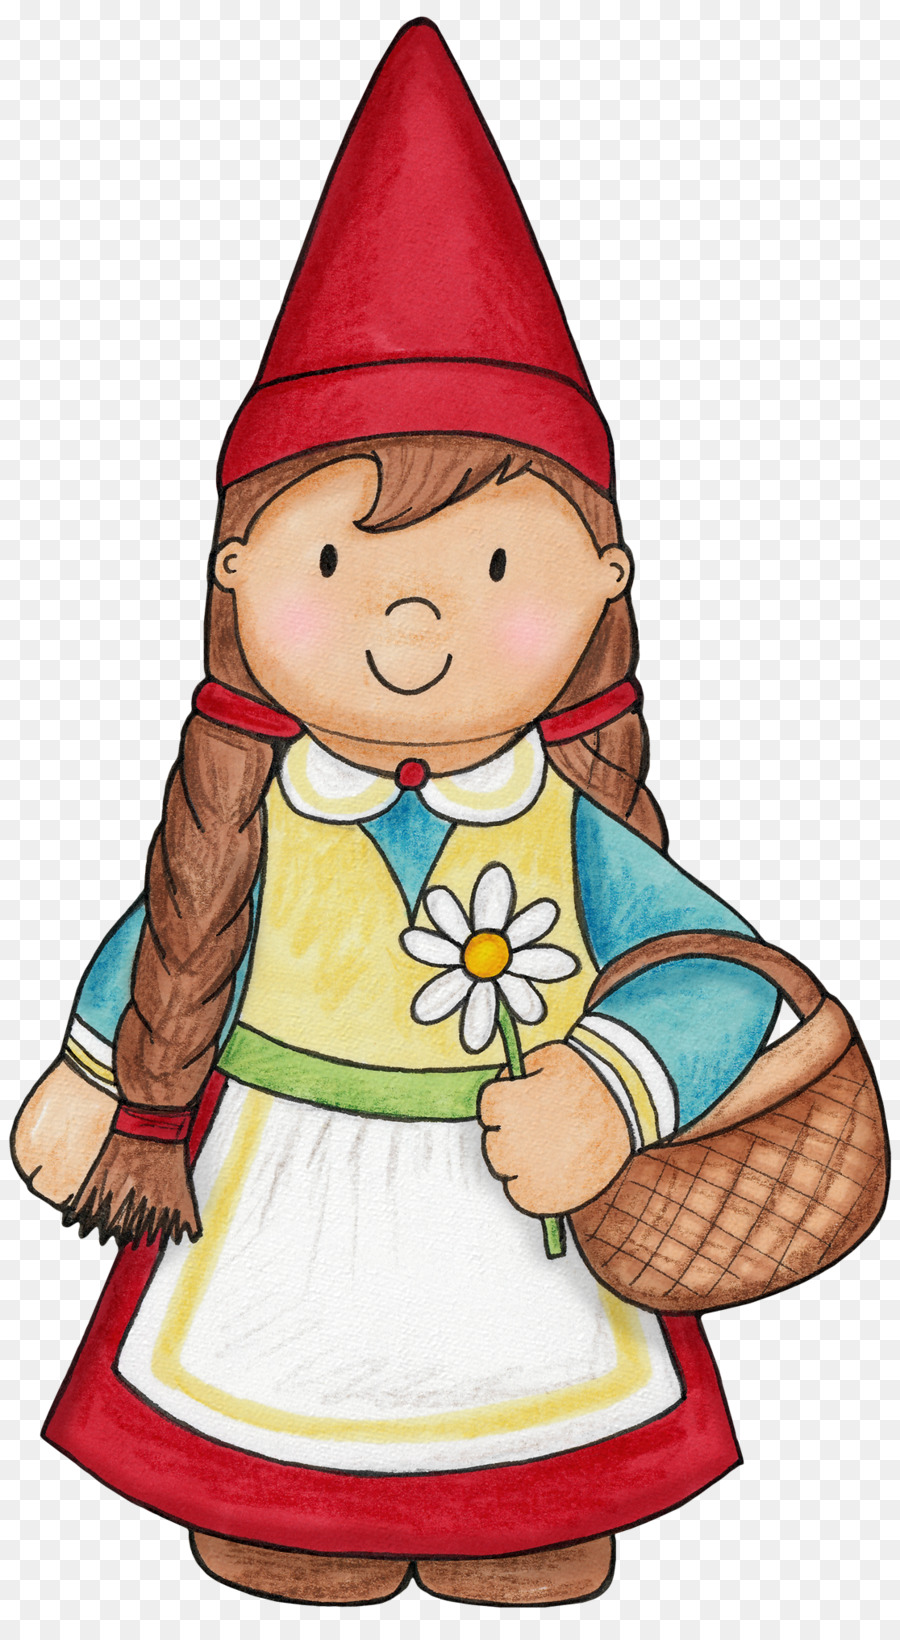 Clip art Garden gnome Openclipart Vector graphics - Gnome png download - 1116*2027 - Free Transparent Garden Gnome png Download.